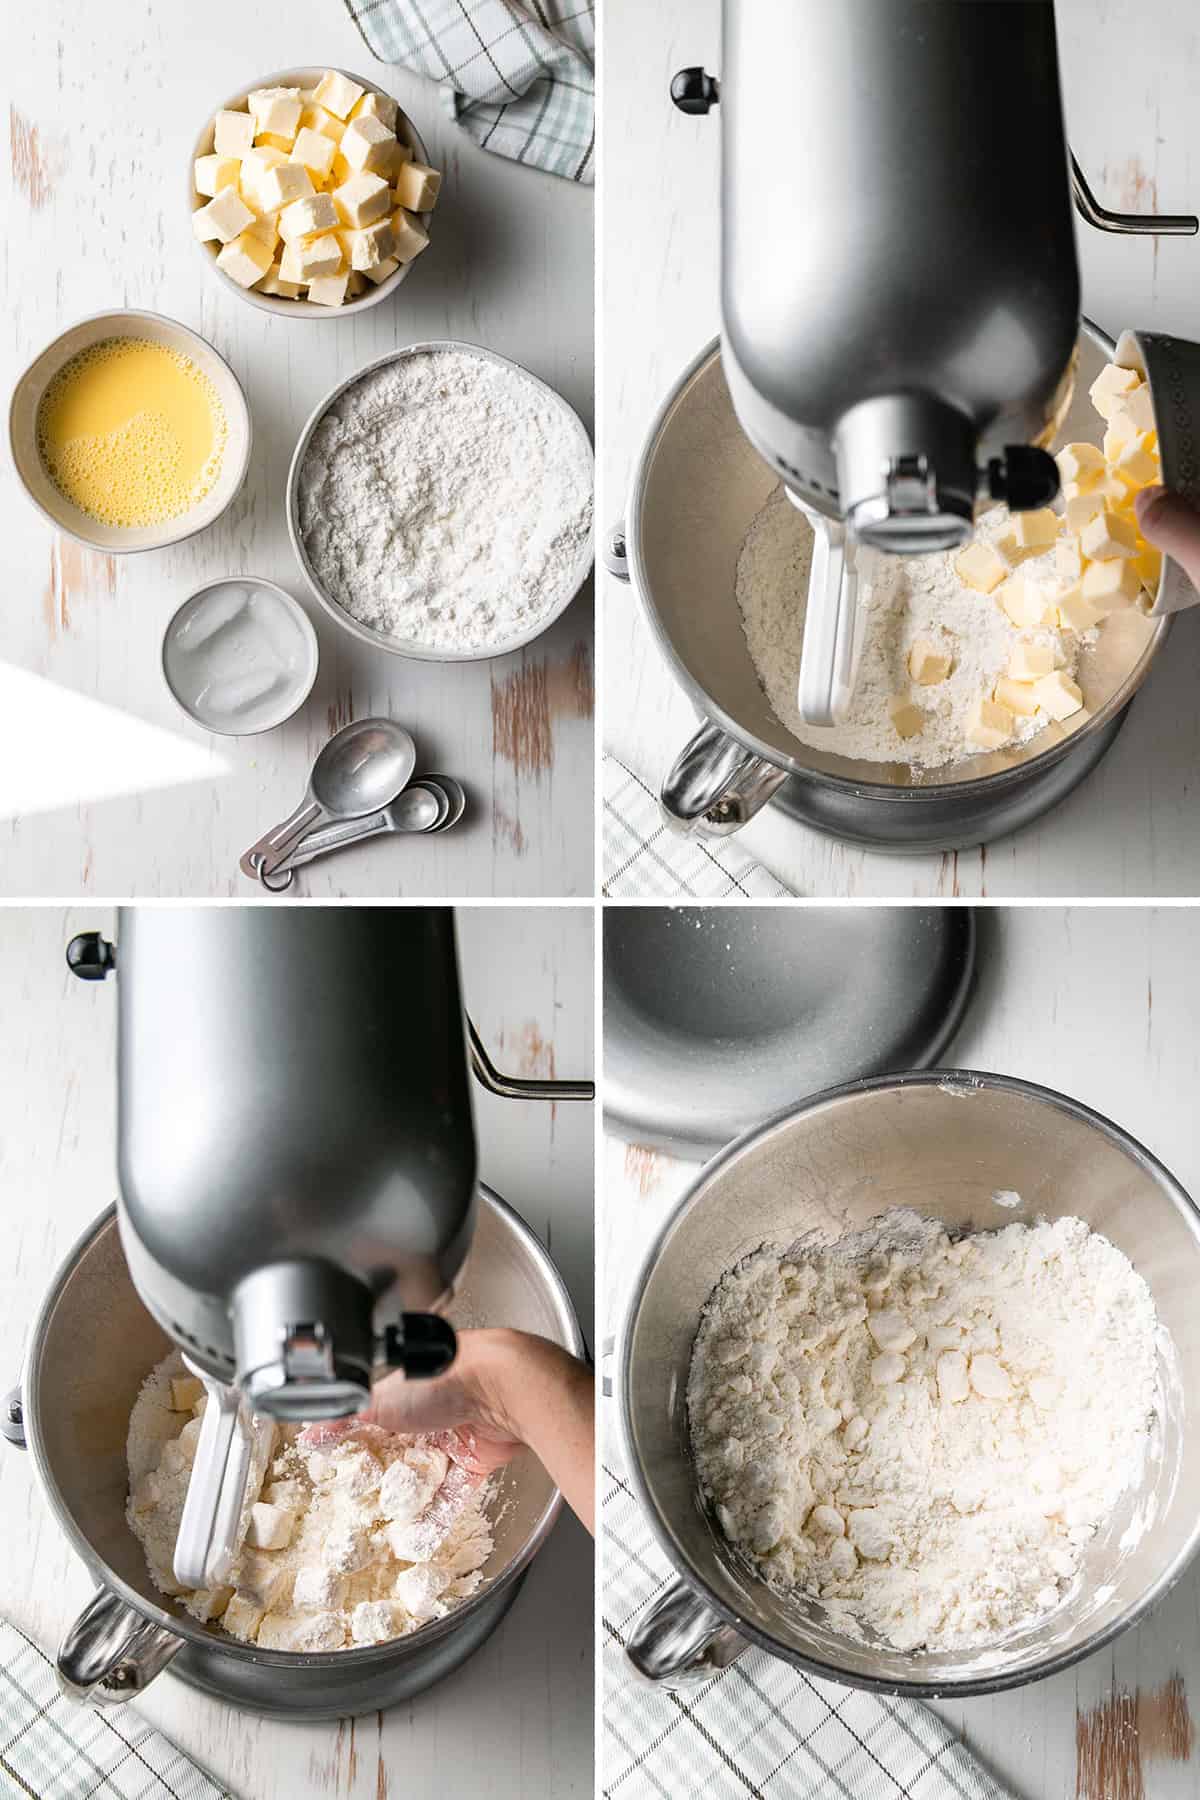 Image collage: 1. Whisked egg yolks with water. Cubed butter in a bowl. Whisked dry ingredients and ice water in bowls. 2. Butter falling into bowl of stand mixer. 3. Tossing butter with flour. 4. Blended butter/flour mixture showing large chunks.